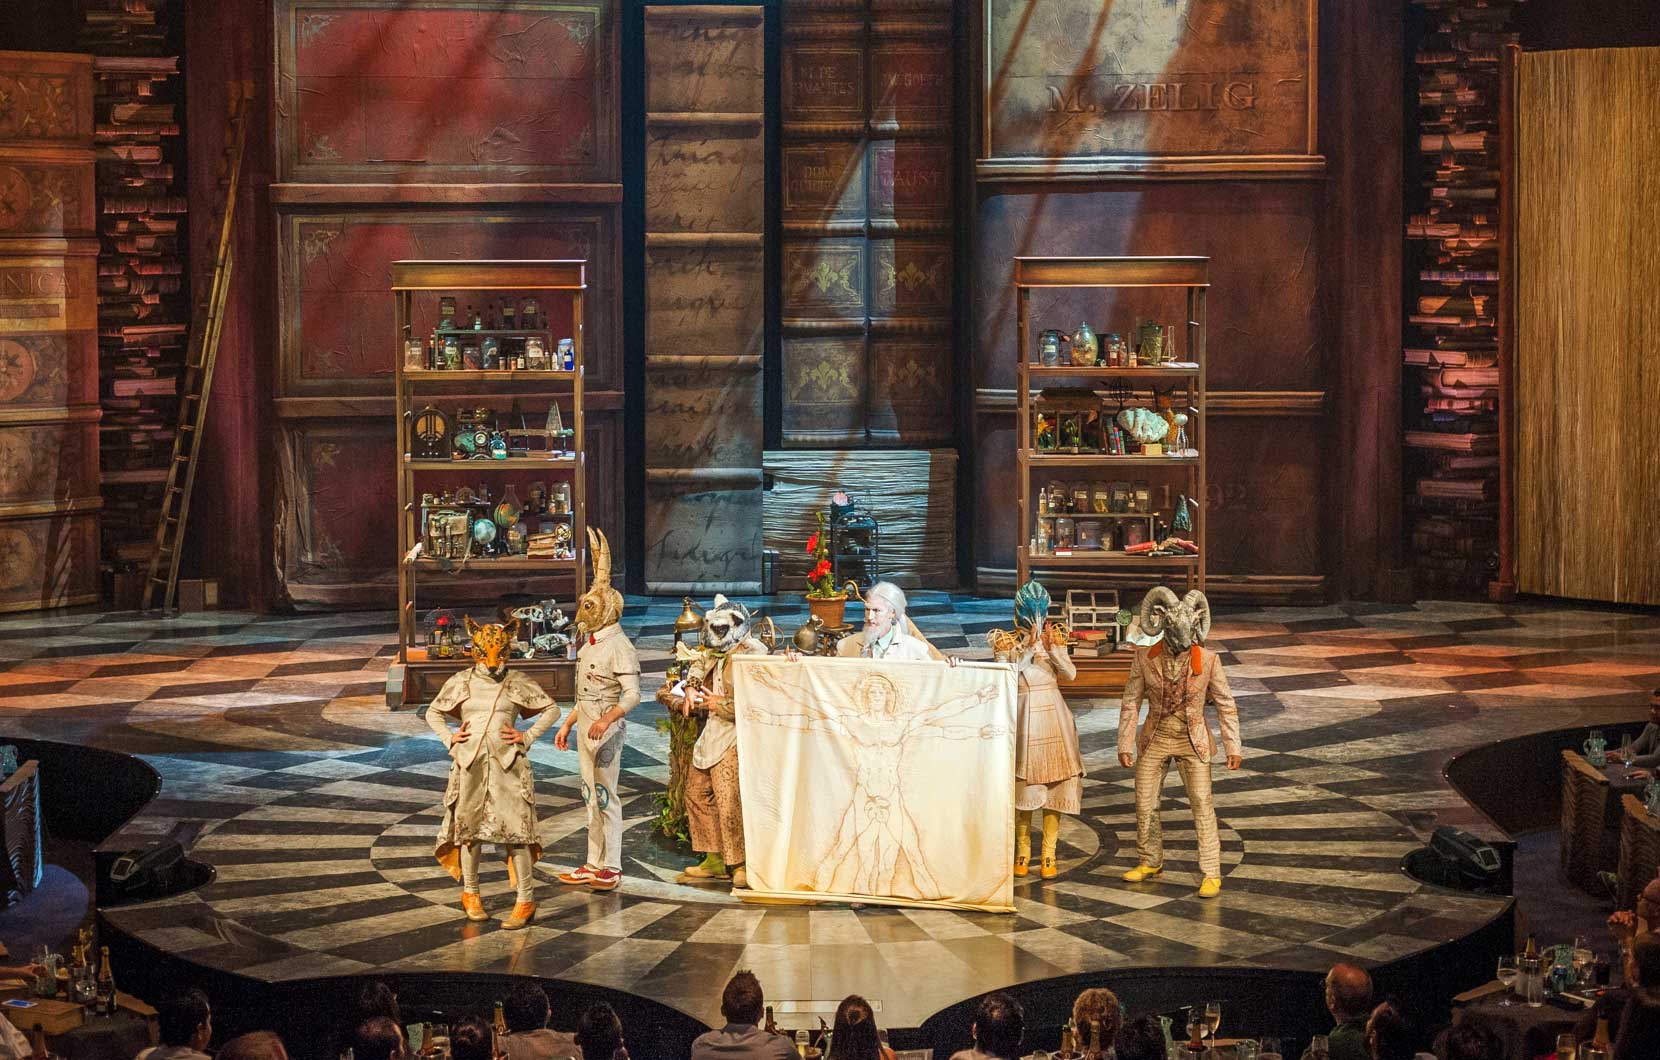 Zelig and his servants examine the audience in Cirque du Soleil's JOYÀ.